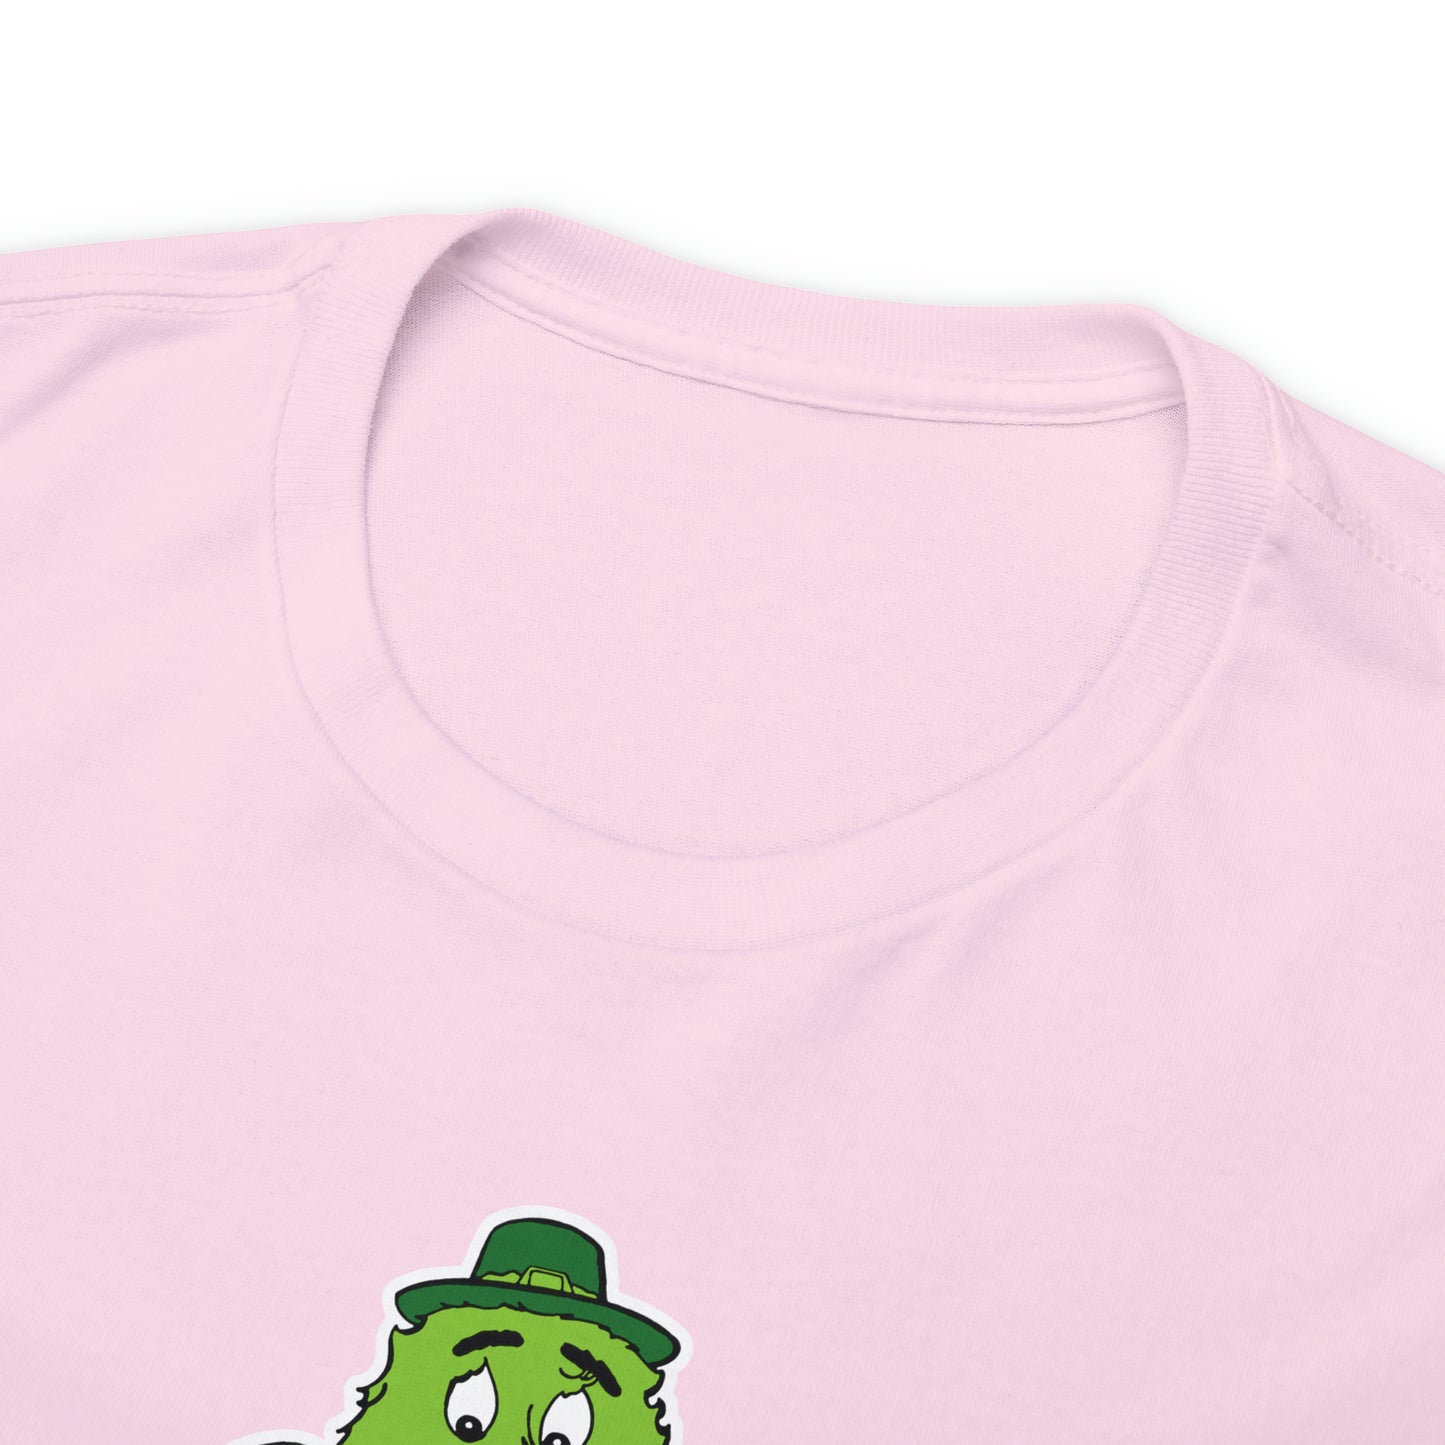 Uncle O'Grimacey T-Shirt